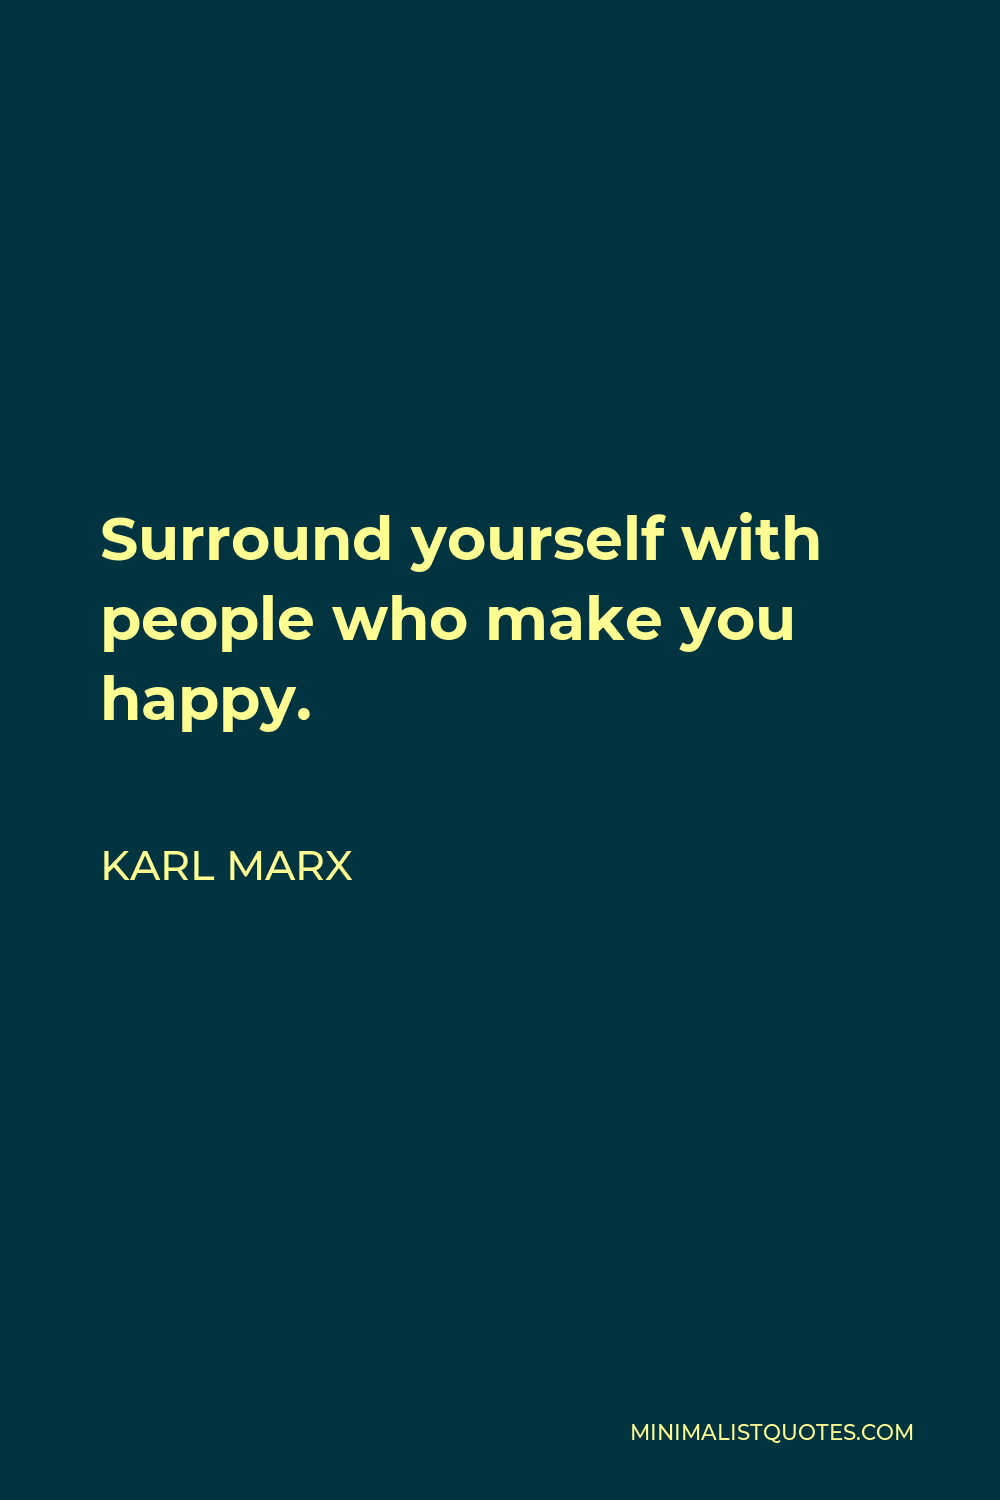 Karl Marx Quote - Surround yourself with people who make you happy.